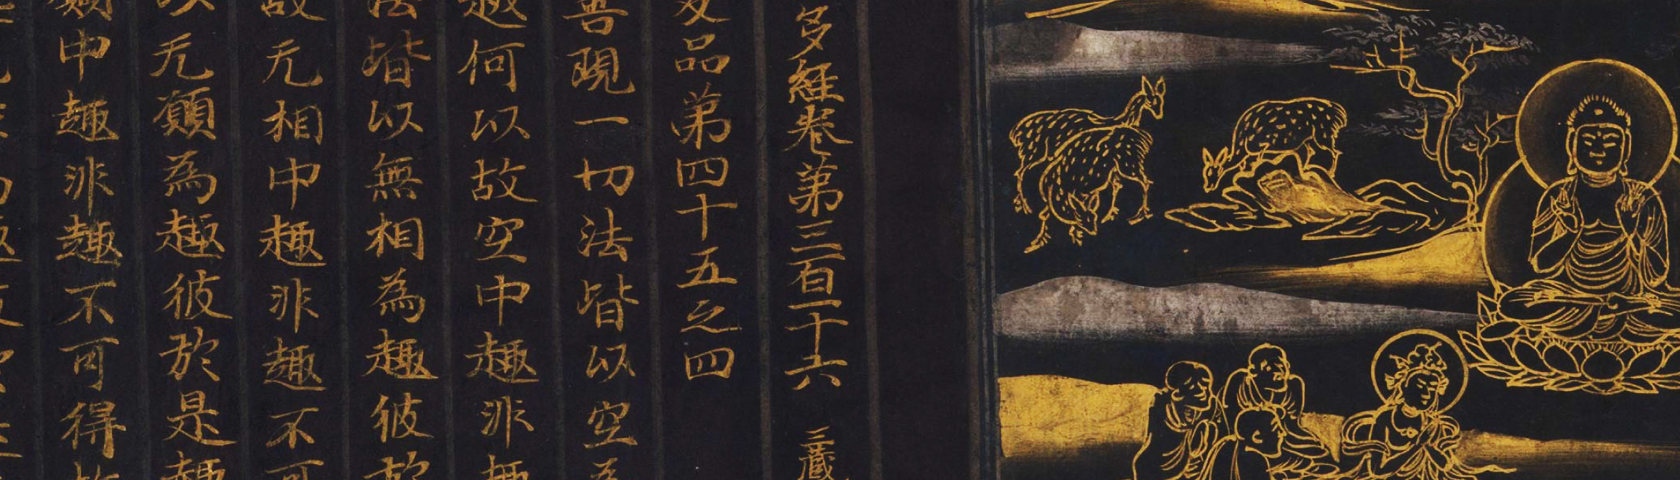 Detail shot of a work of art with gold Japanese calligraphy and an illustrated Buddha, disciples and deer